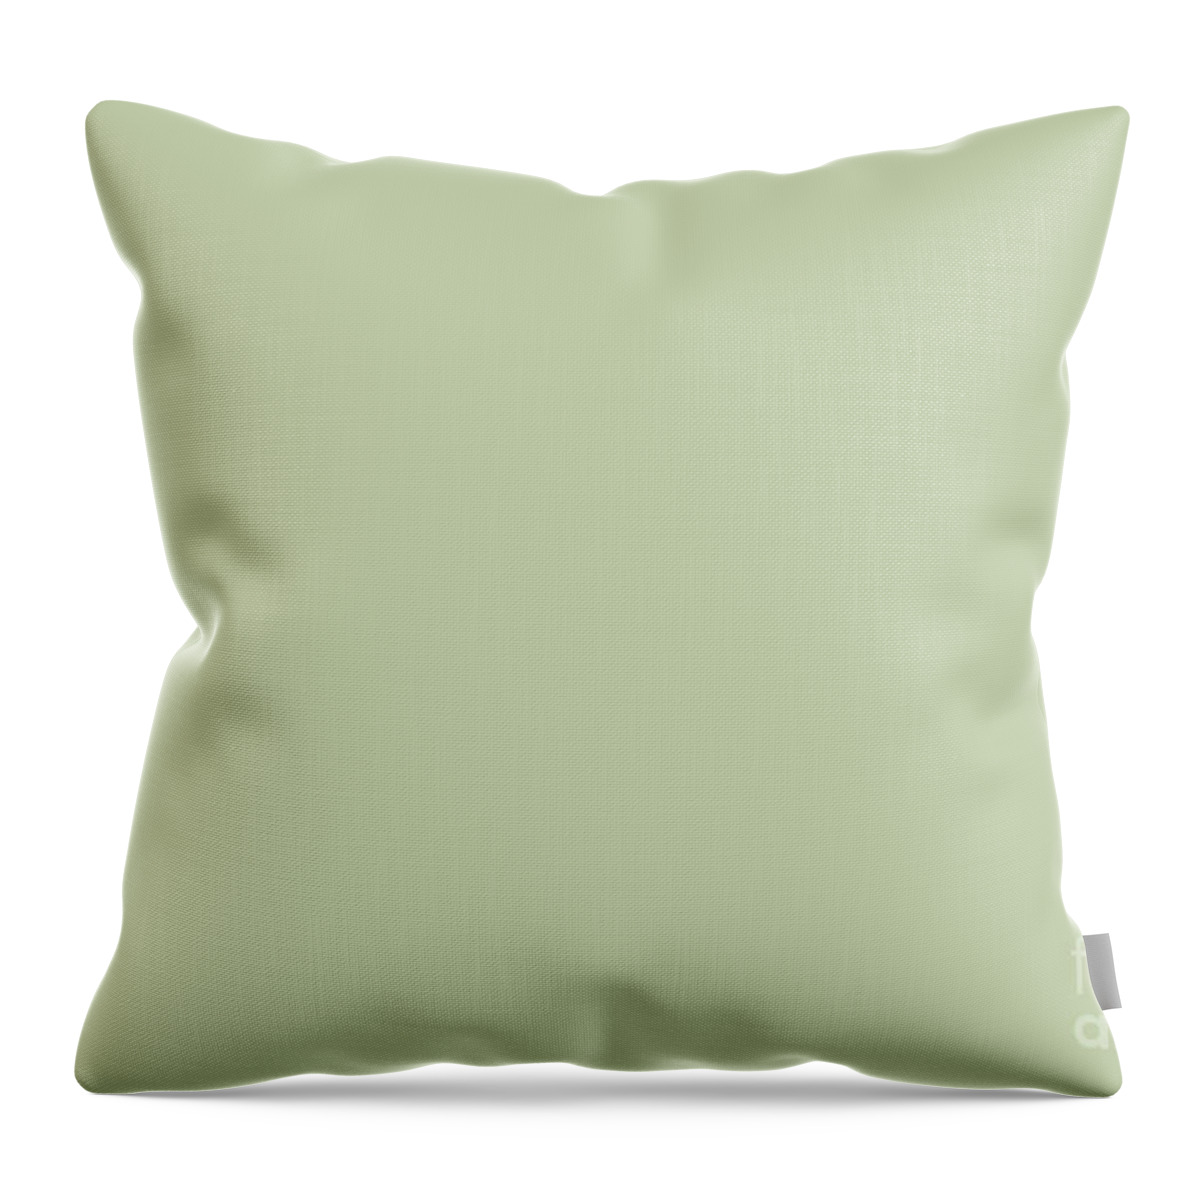 Green Throw Pillow featuring the digital art Pratt and Lambert 2019 Mellon Green - Sage Green 18-28 Solid Color by PIPA Fine Art - Simply Solid